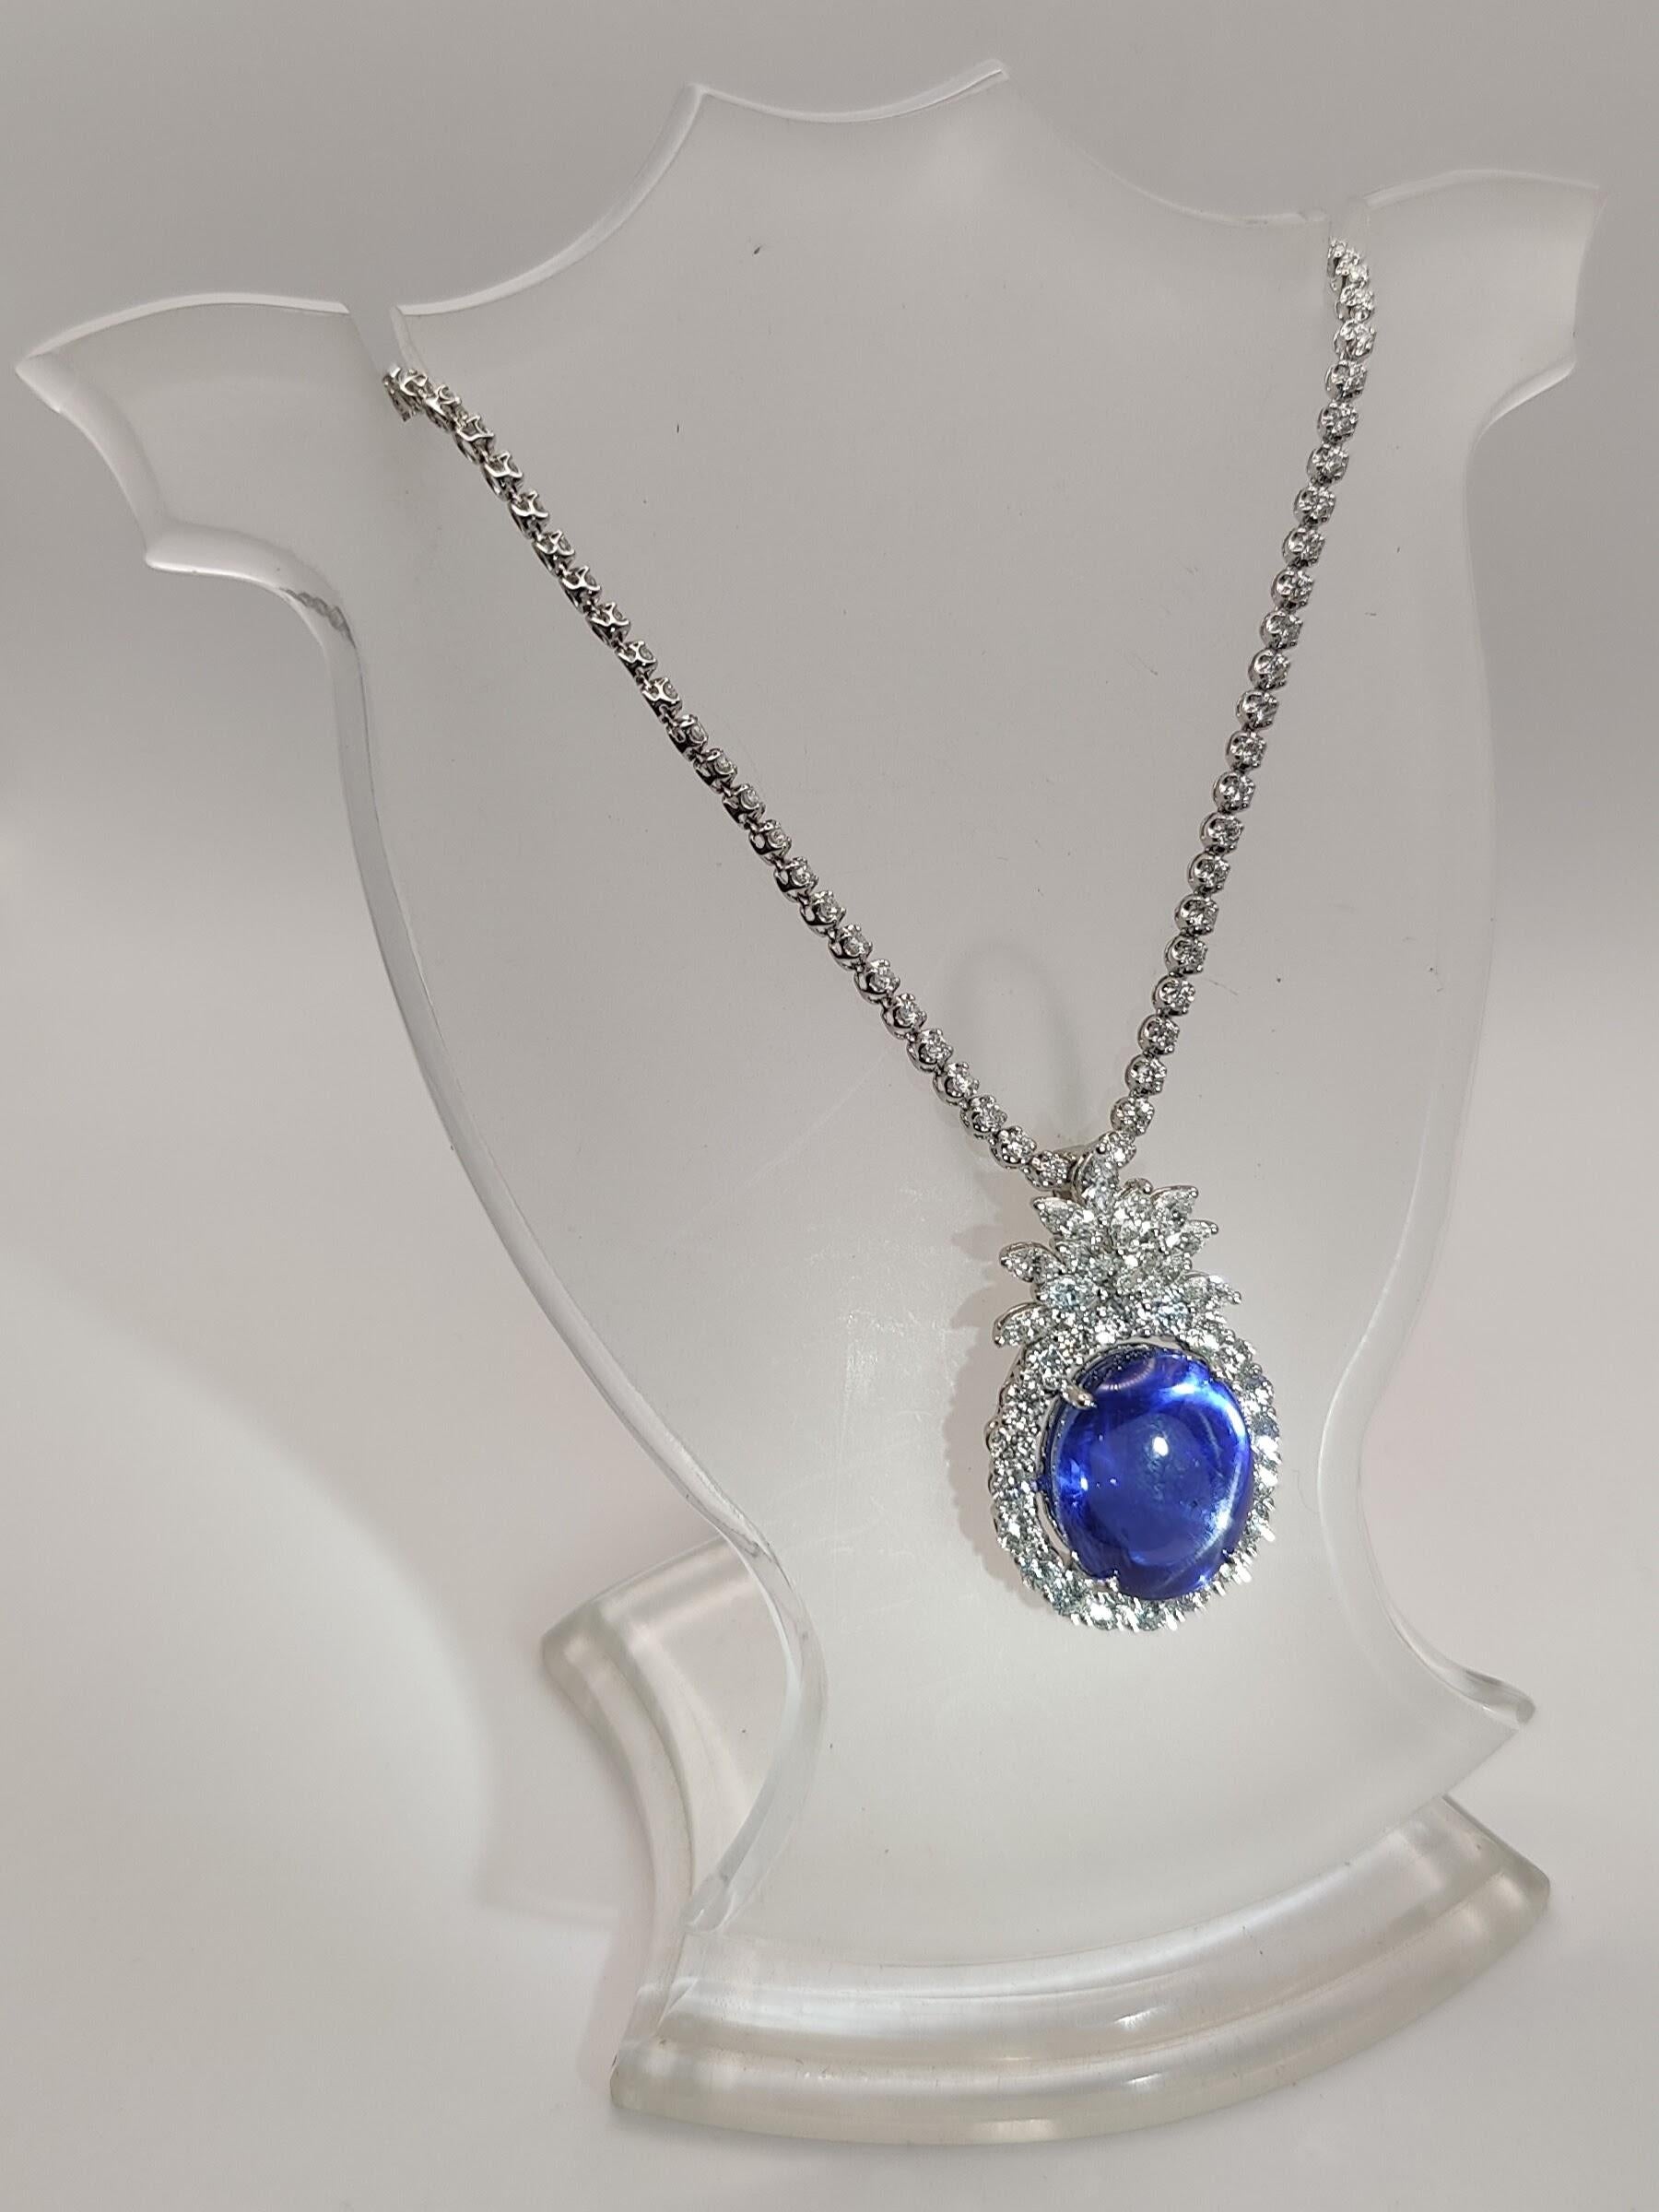 Contemporary Gublin Certified 26.88ct Unheated Blue Star Sapphire & 7.41ct Diamond Necklace For Sale